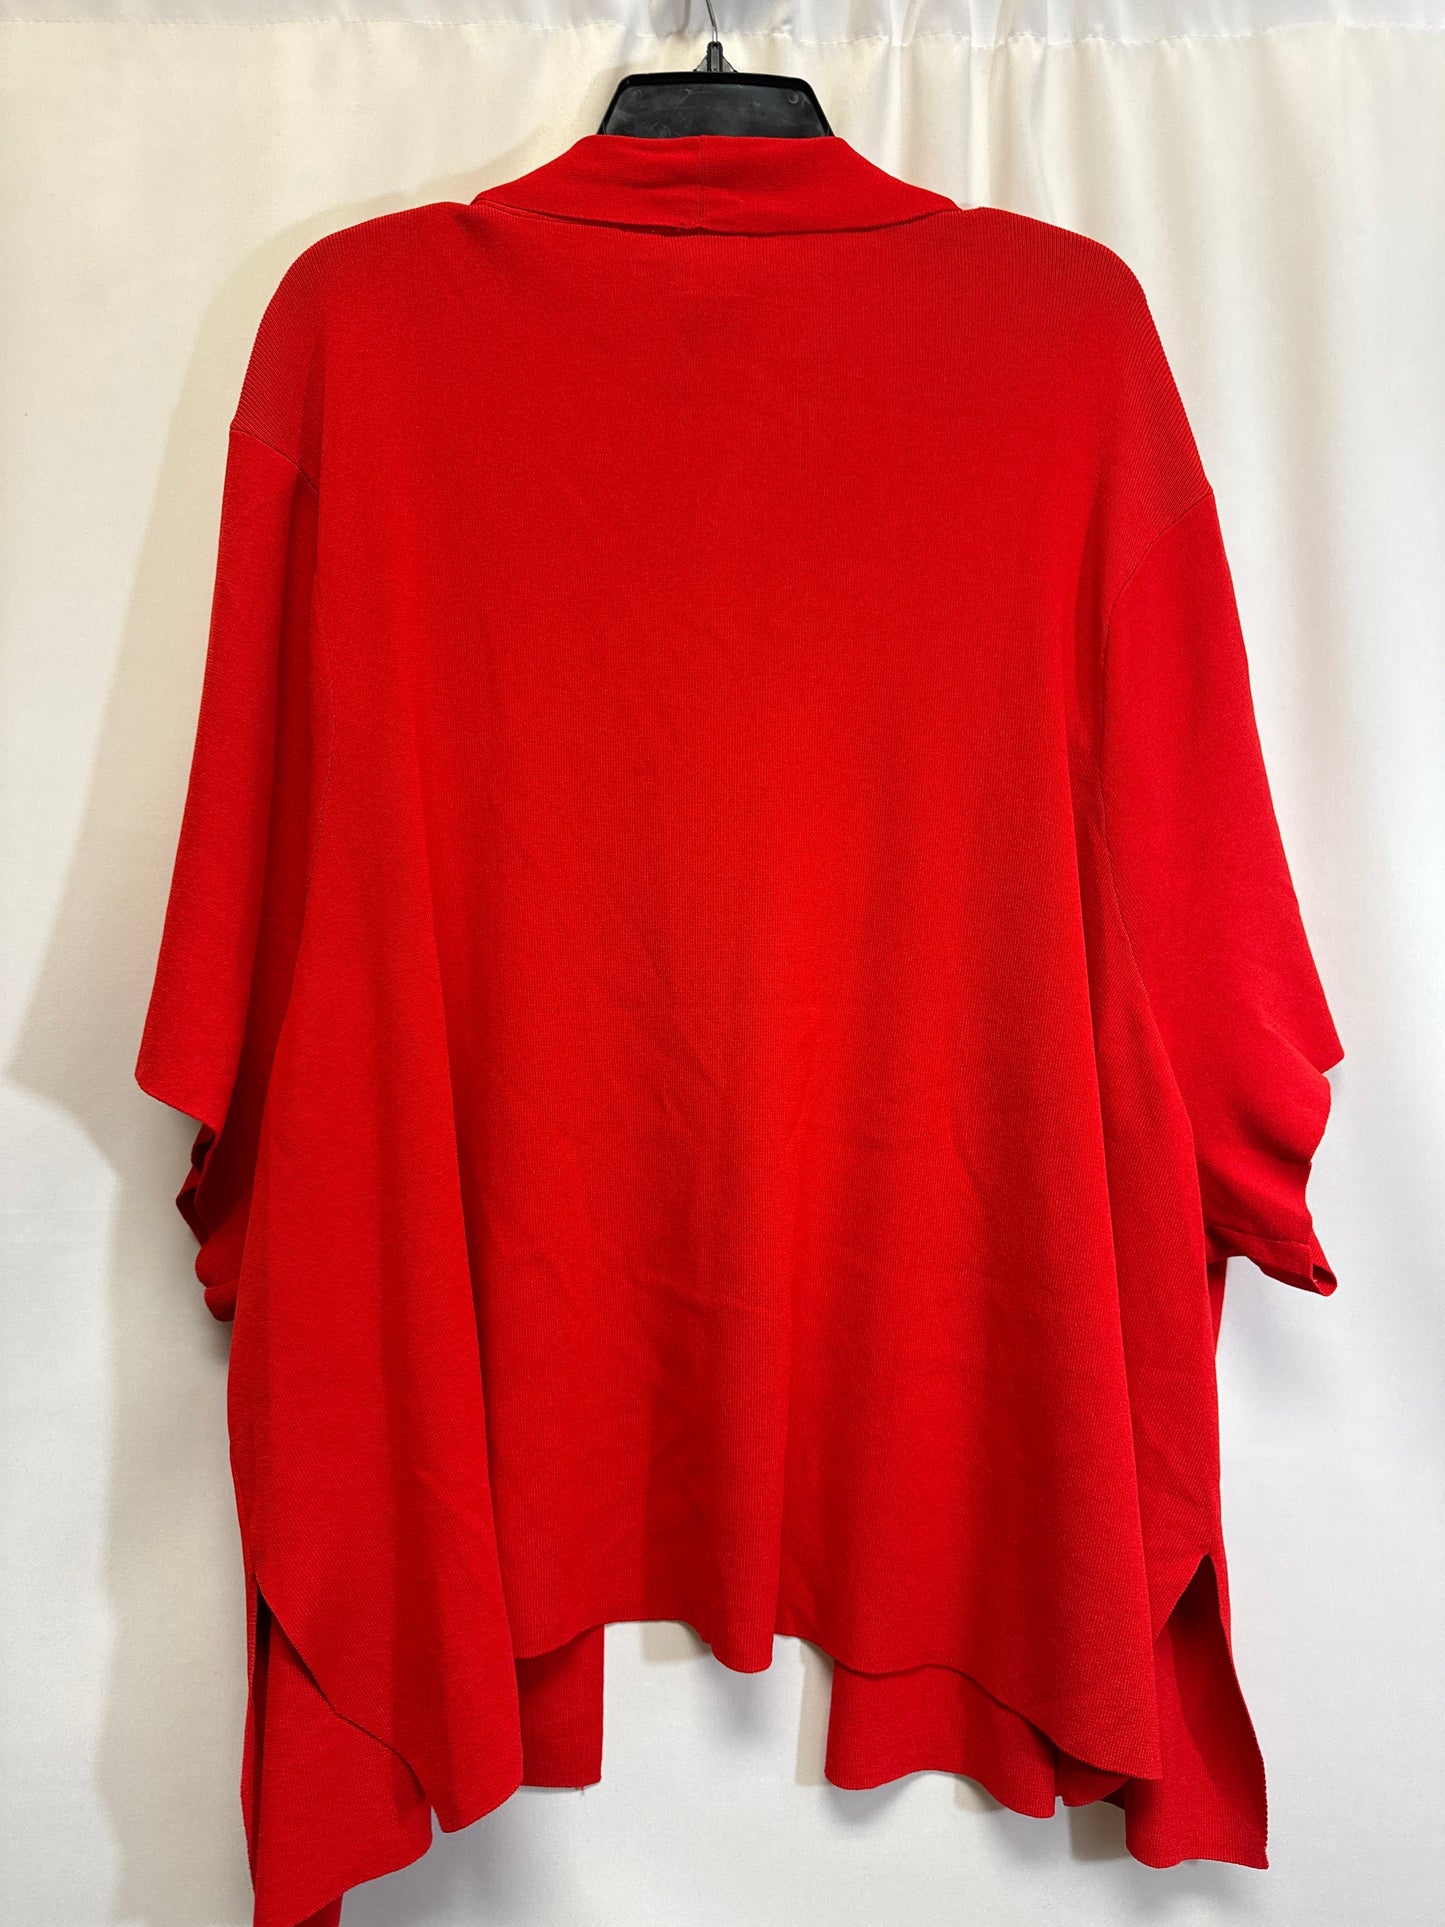 Red Cardigan Clothes Mentor, Size 3x